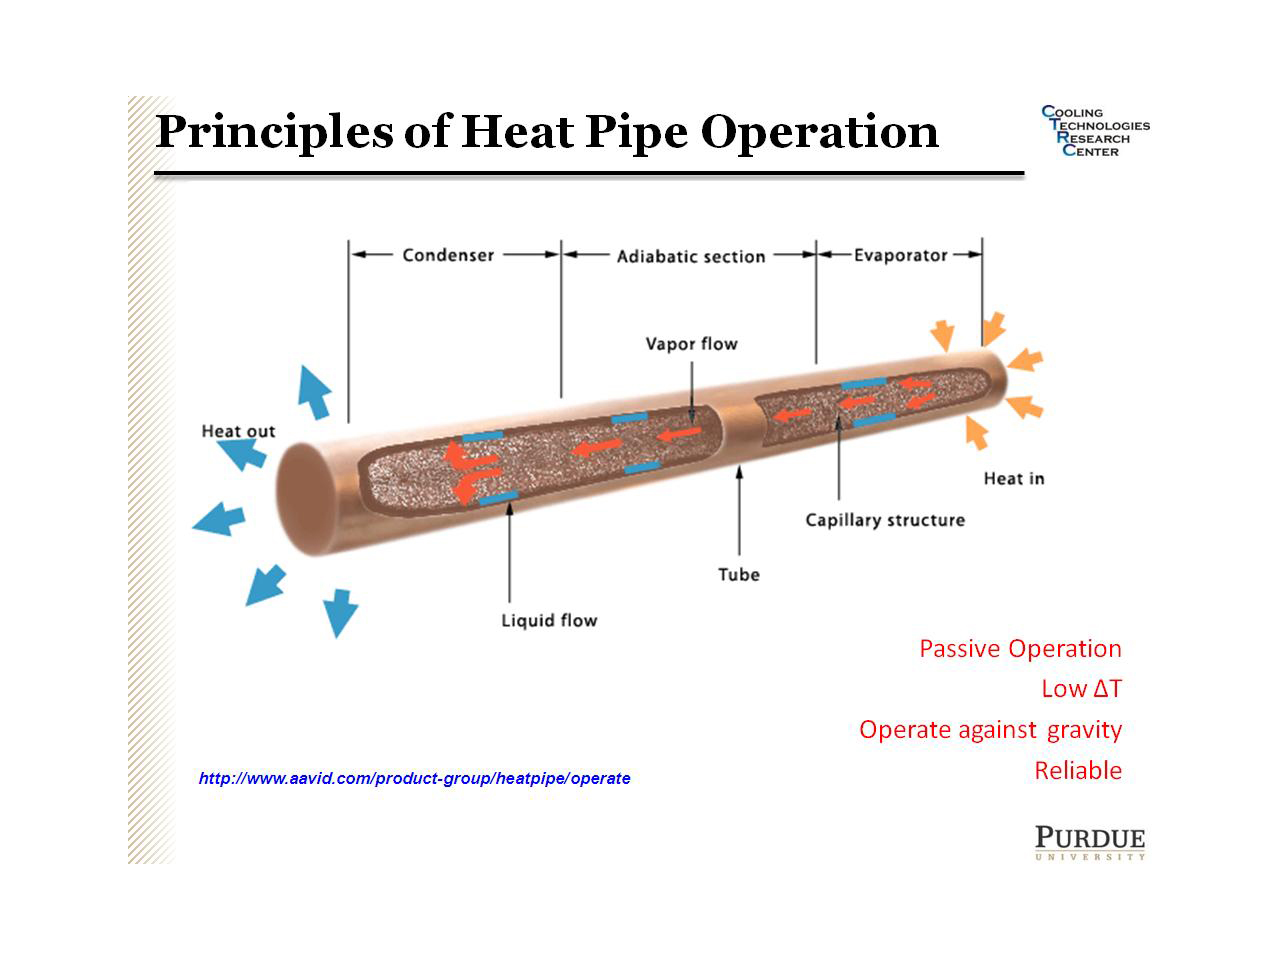 Principles of Heat Pipe Operation